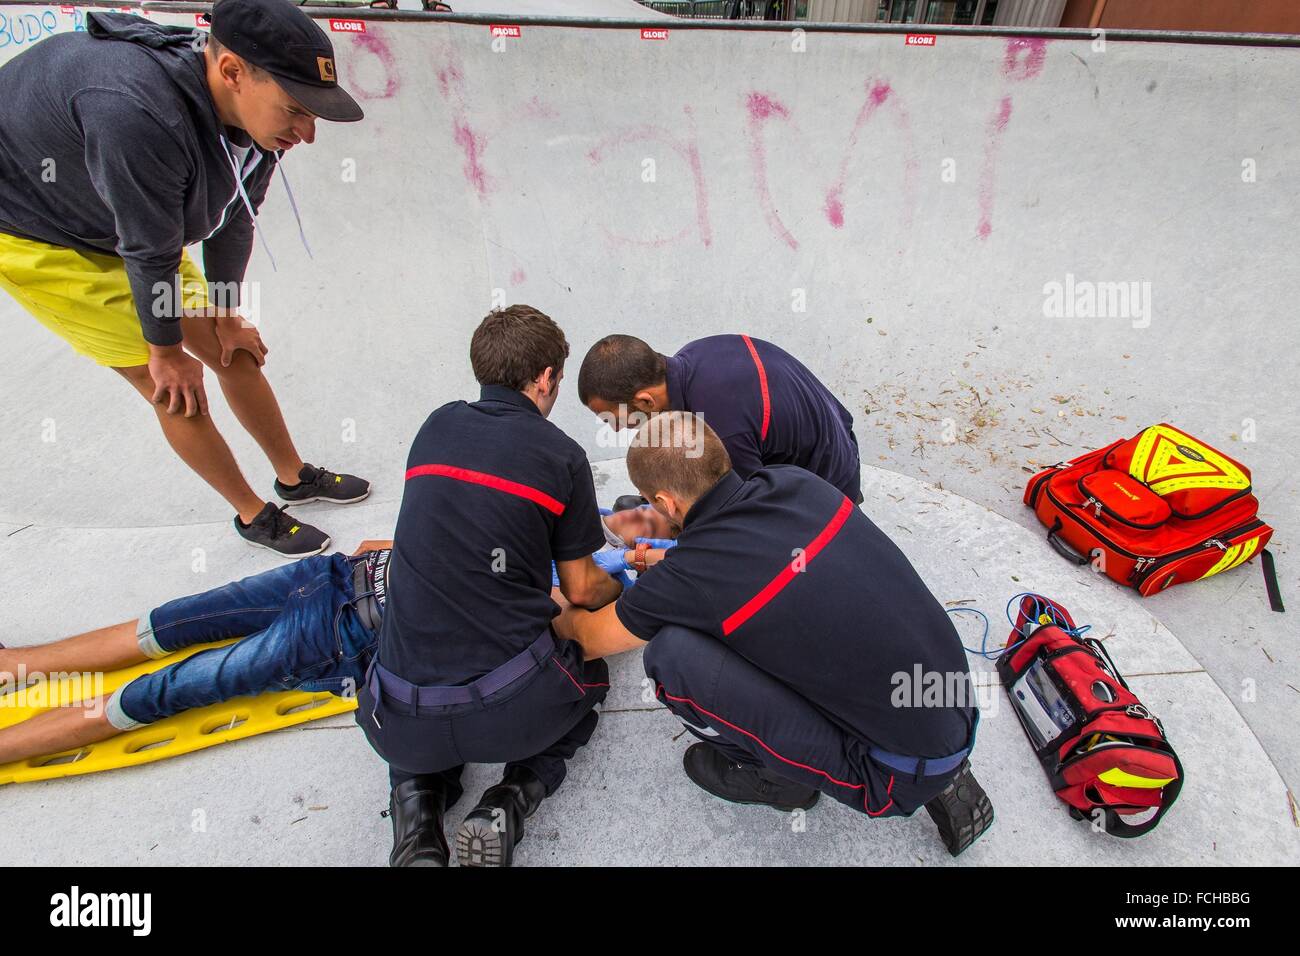 FIREFIGHTERS RESPONDING TO AN EMERGENCY IN A SKATEPARK Stock Photo